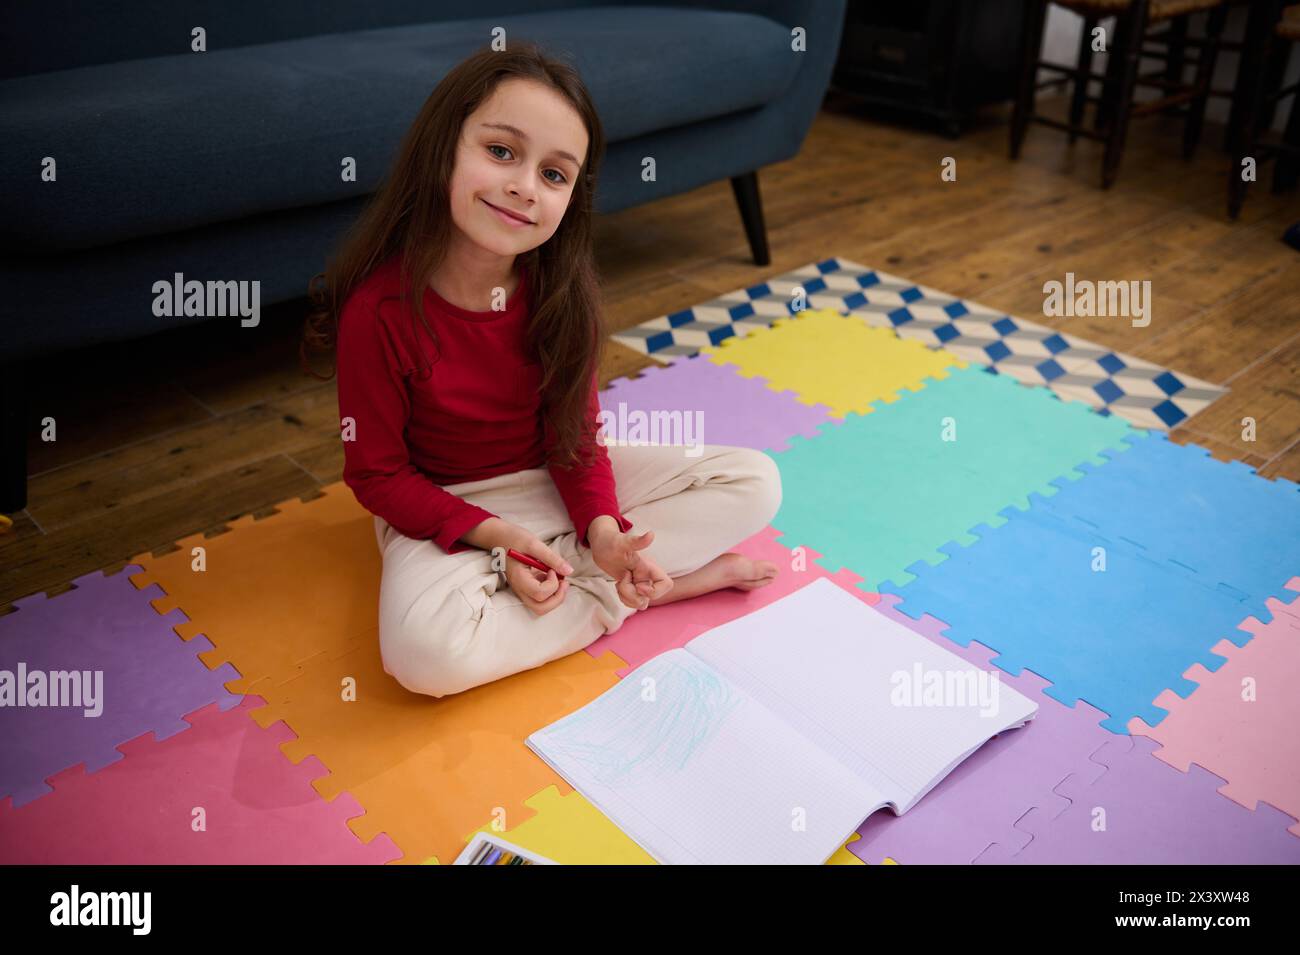 Caucasian lovely little child girl sitting on a colorful puzzle carpet, smiling looking at camera, doing homework. People. Kids. Education concept Stock Photo